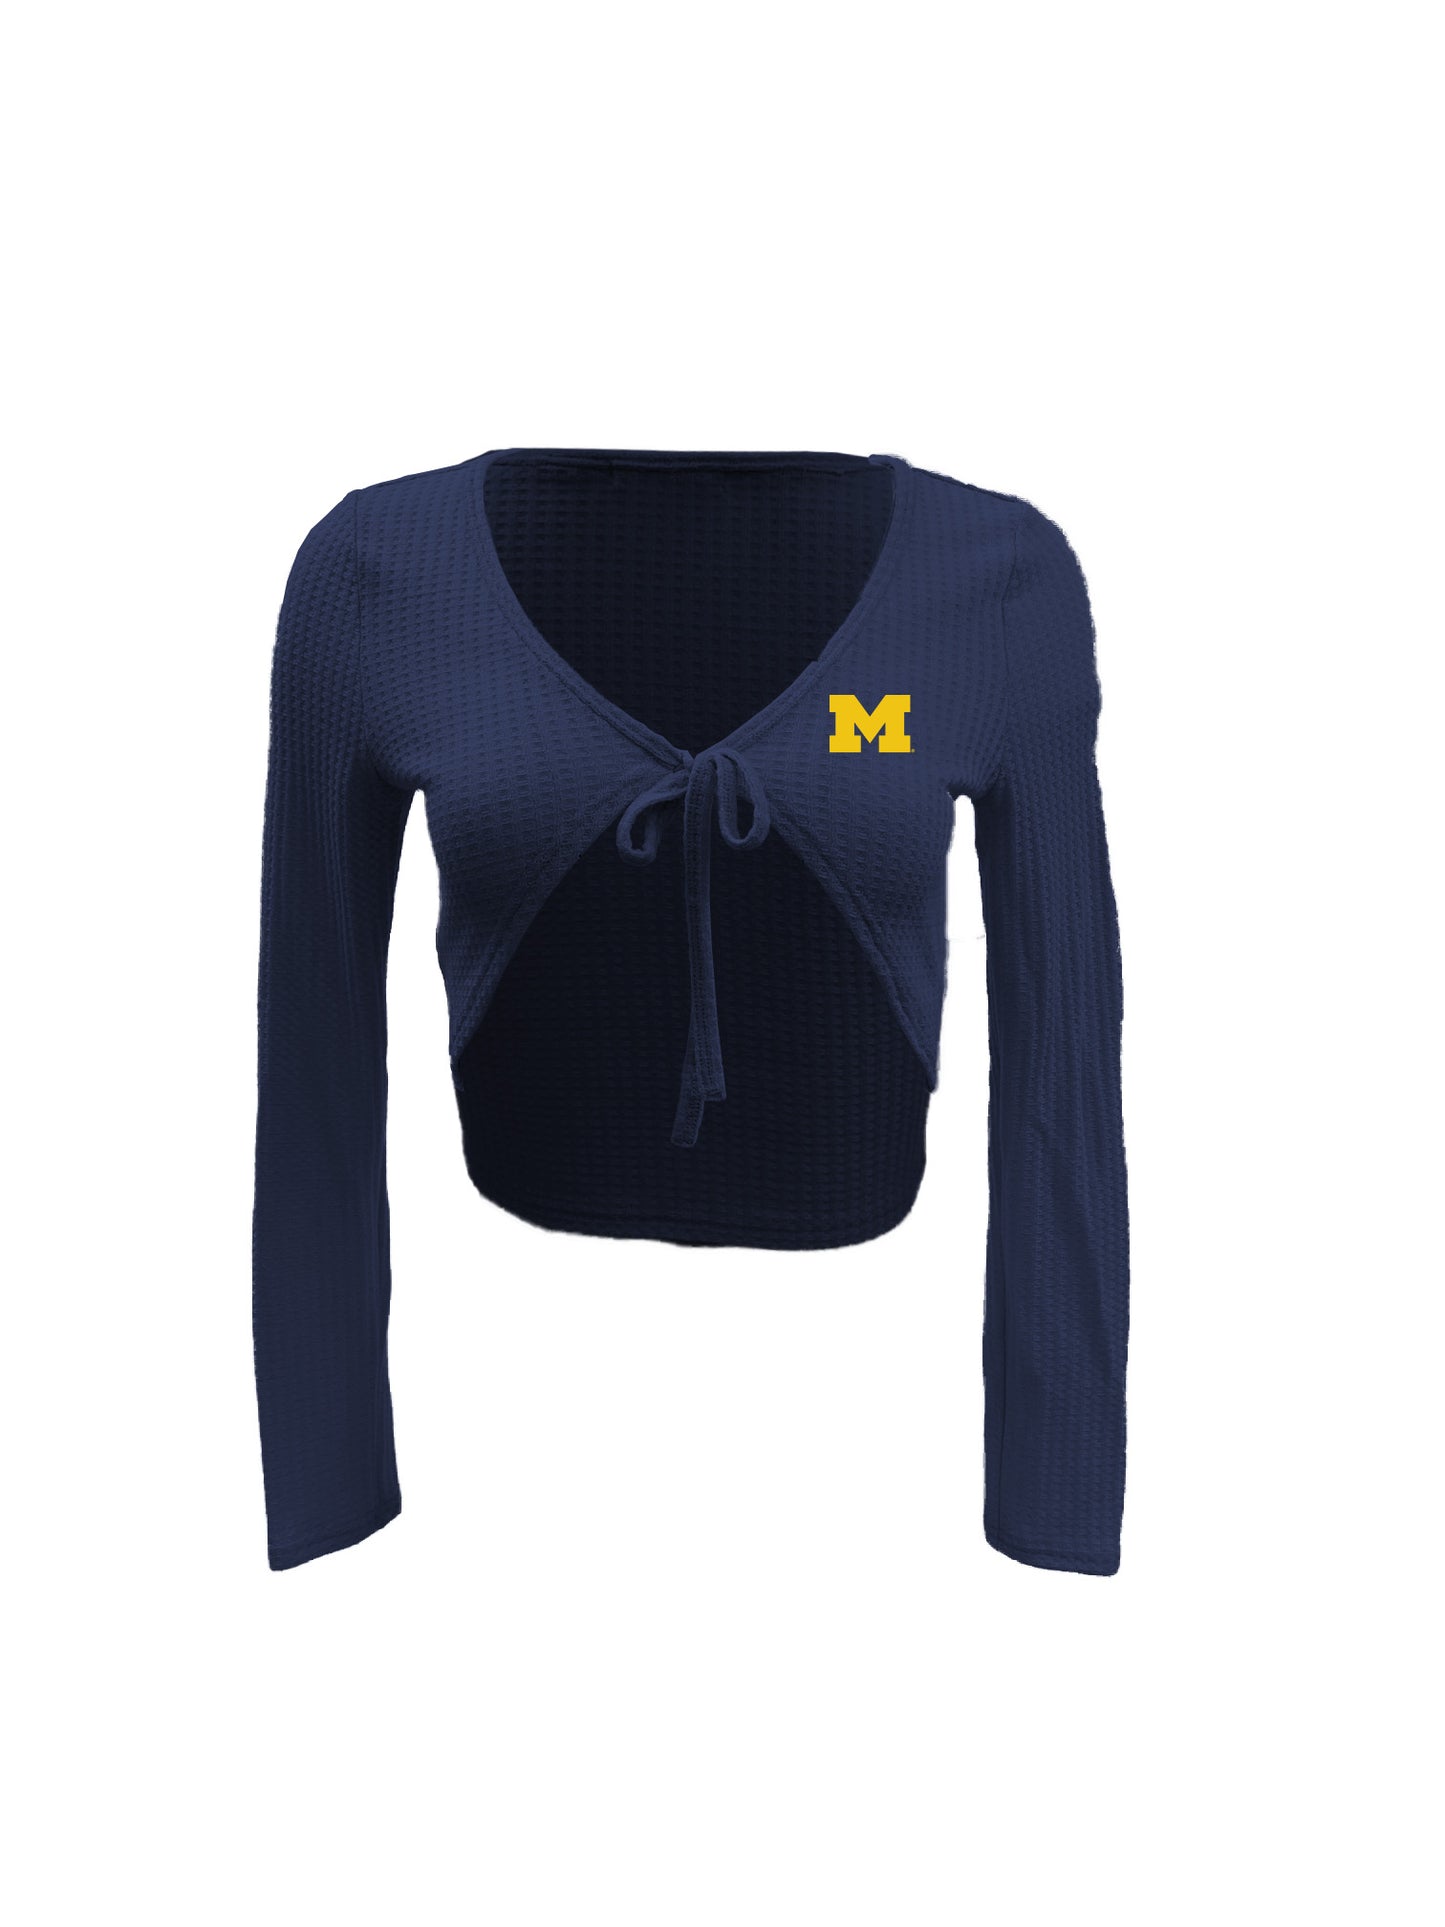 Michigan Wolverines Women's Wes and Willy Long Sleeve Tie Front Crop Top